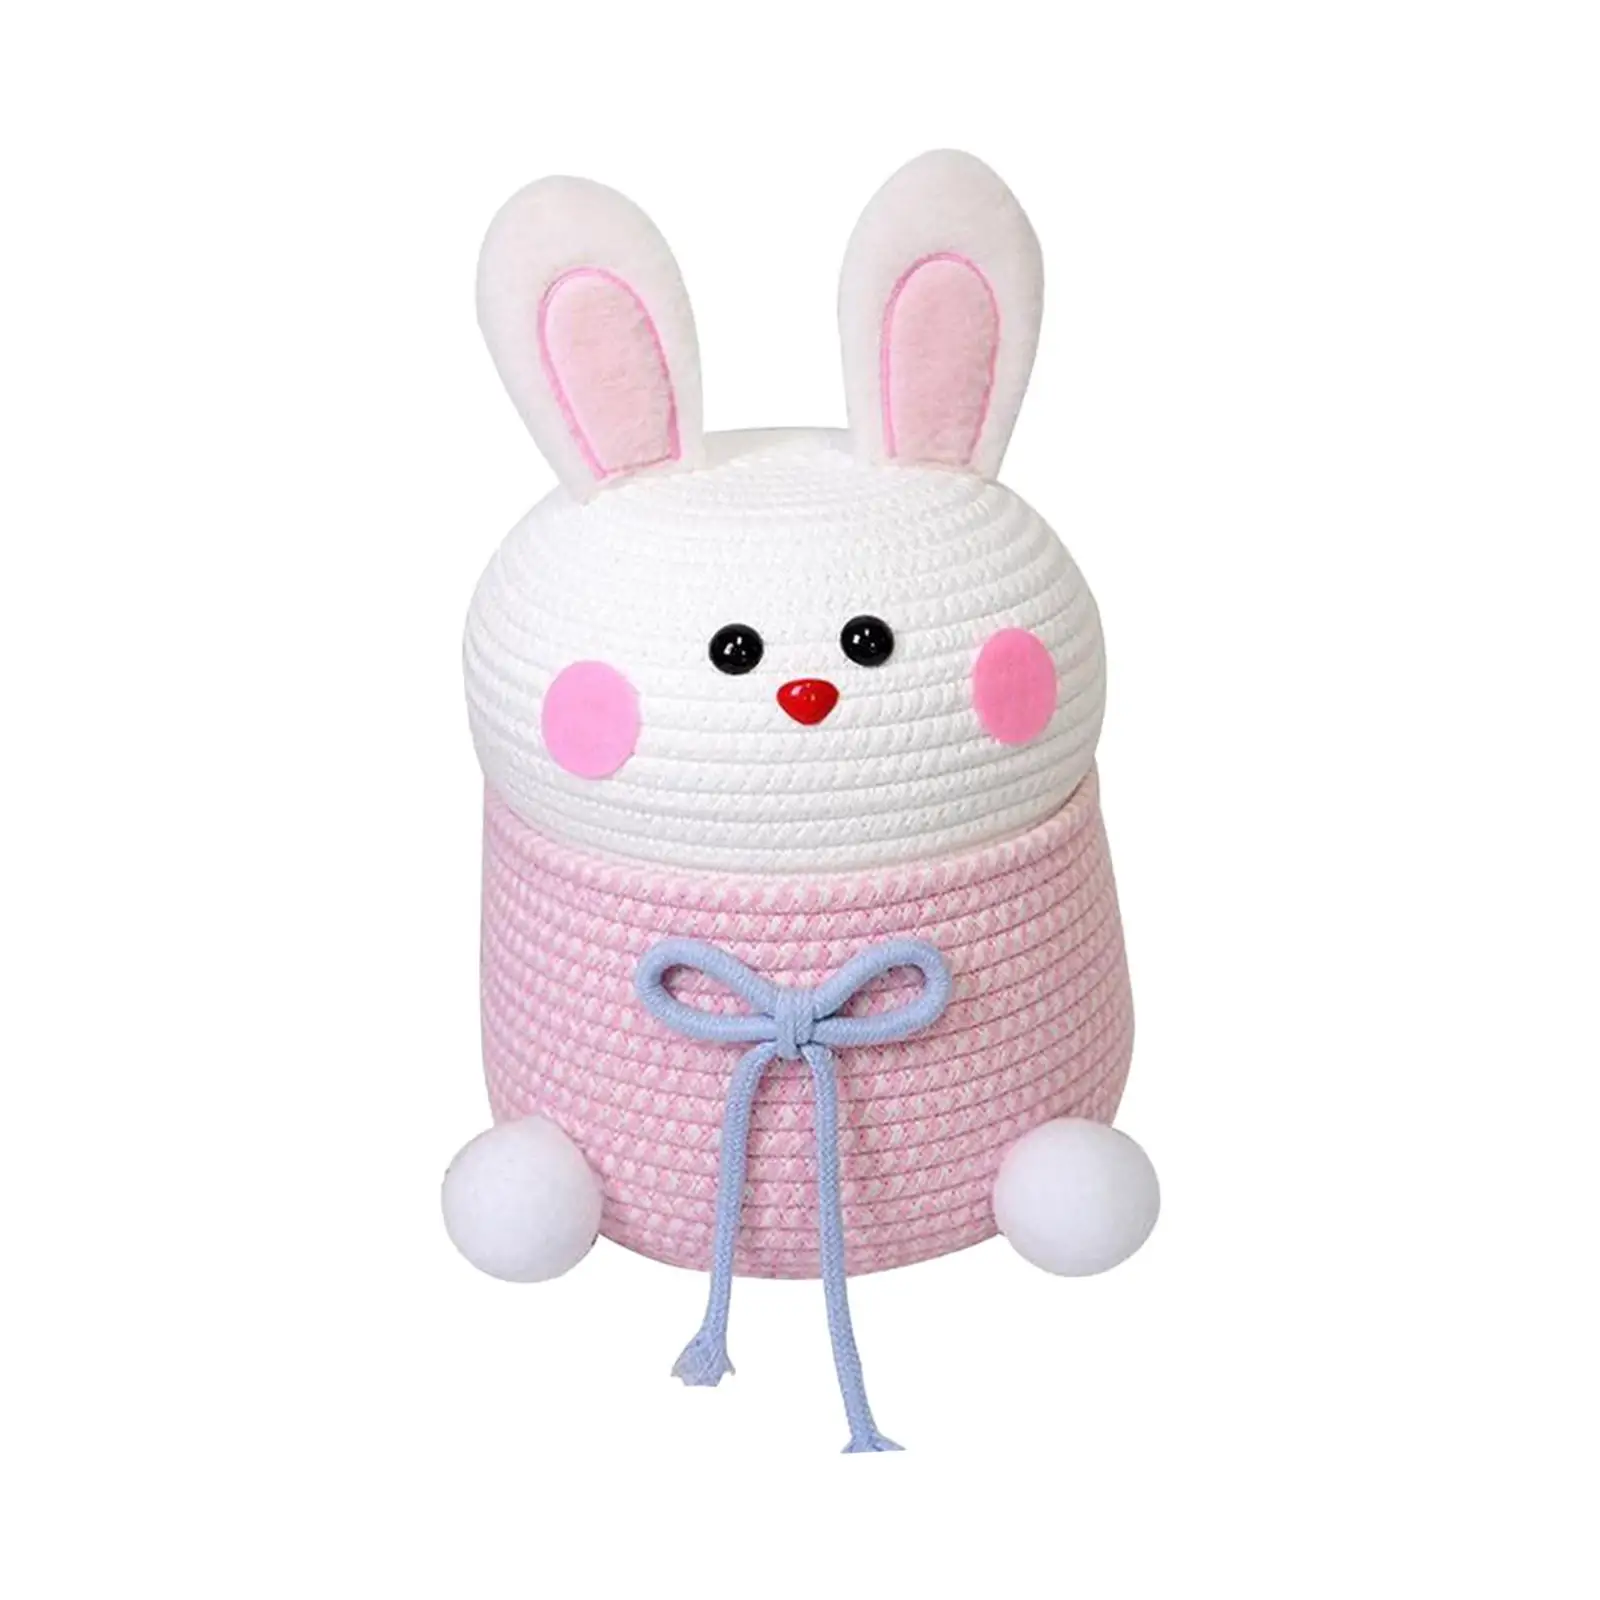 Rabbit Woven Basket Tabletop Nordic Sturdy Large Capacity Living Room Soft Makeup Cosmetic Holder Storage Bins Toys Shoes Books